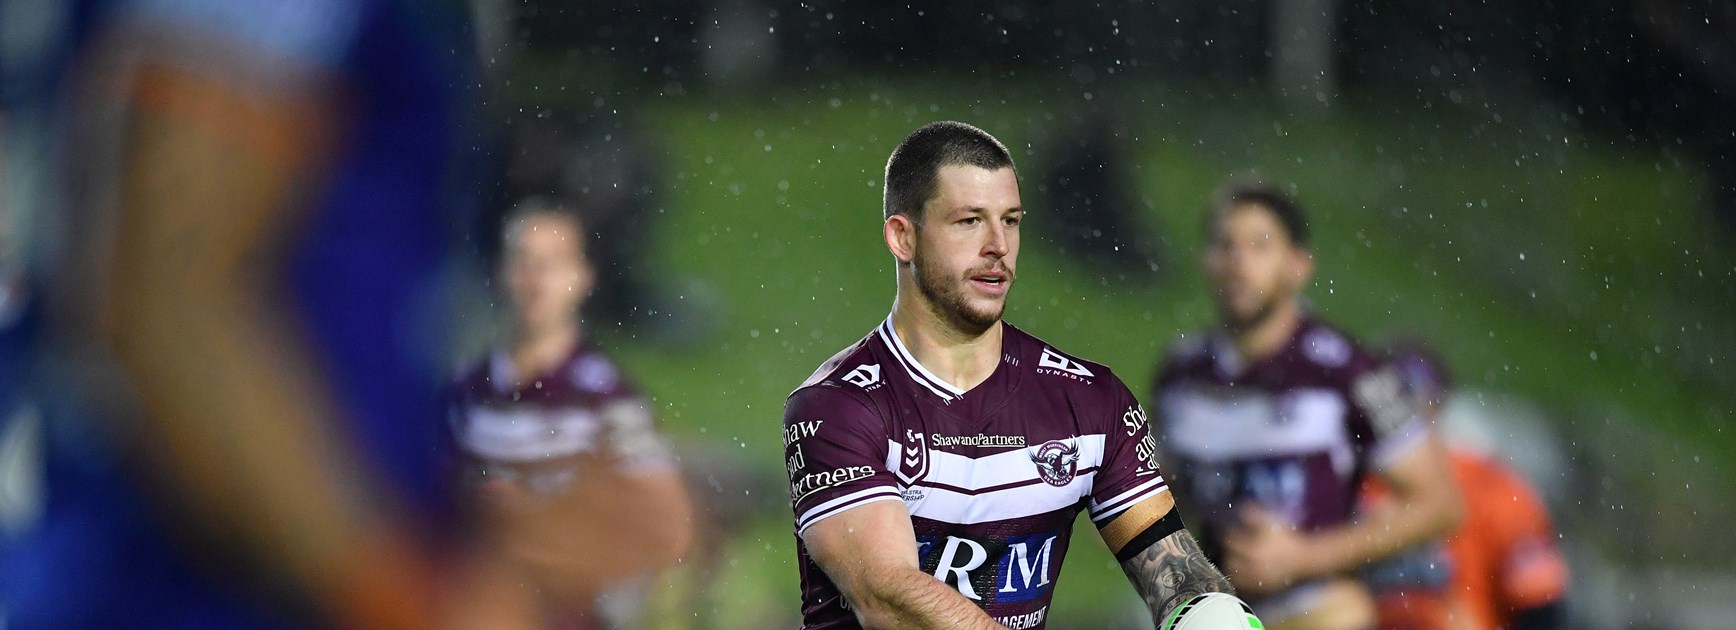 Sea Eagles lose 26-22 to Warriors at Lottoland